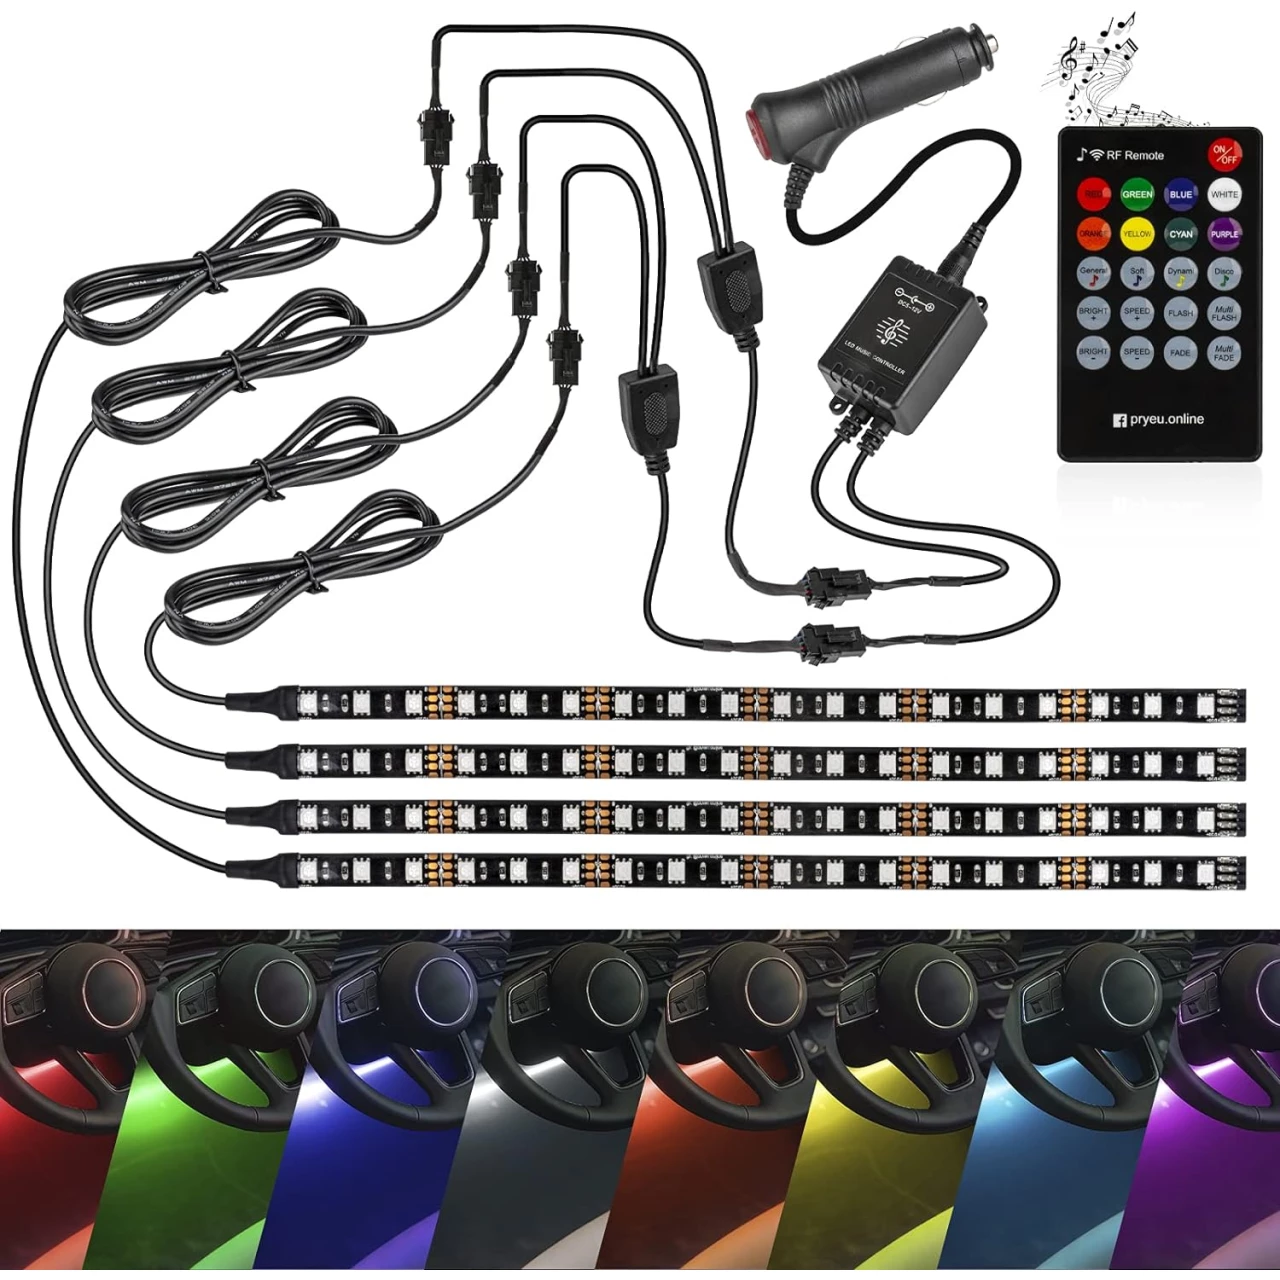 Geeon RGB Interior Car LED Strip Lights 12&rsquo;&rsquo;/30CM for Automotive Under Dash Footwell Lighting with Music Sync Remote and 12V Lighter Plug, Pack of 4